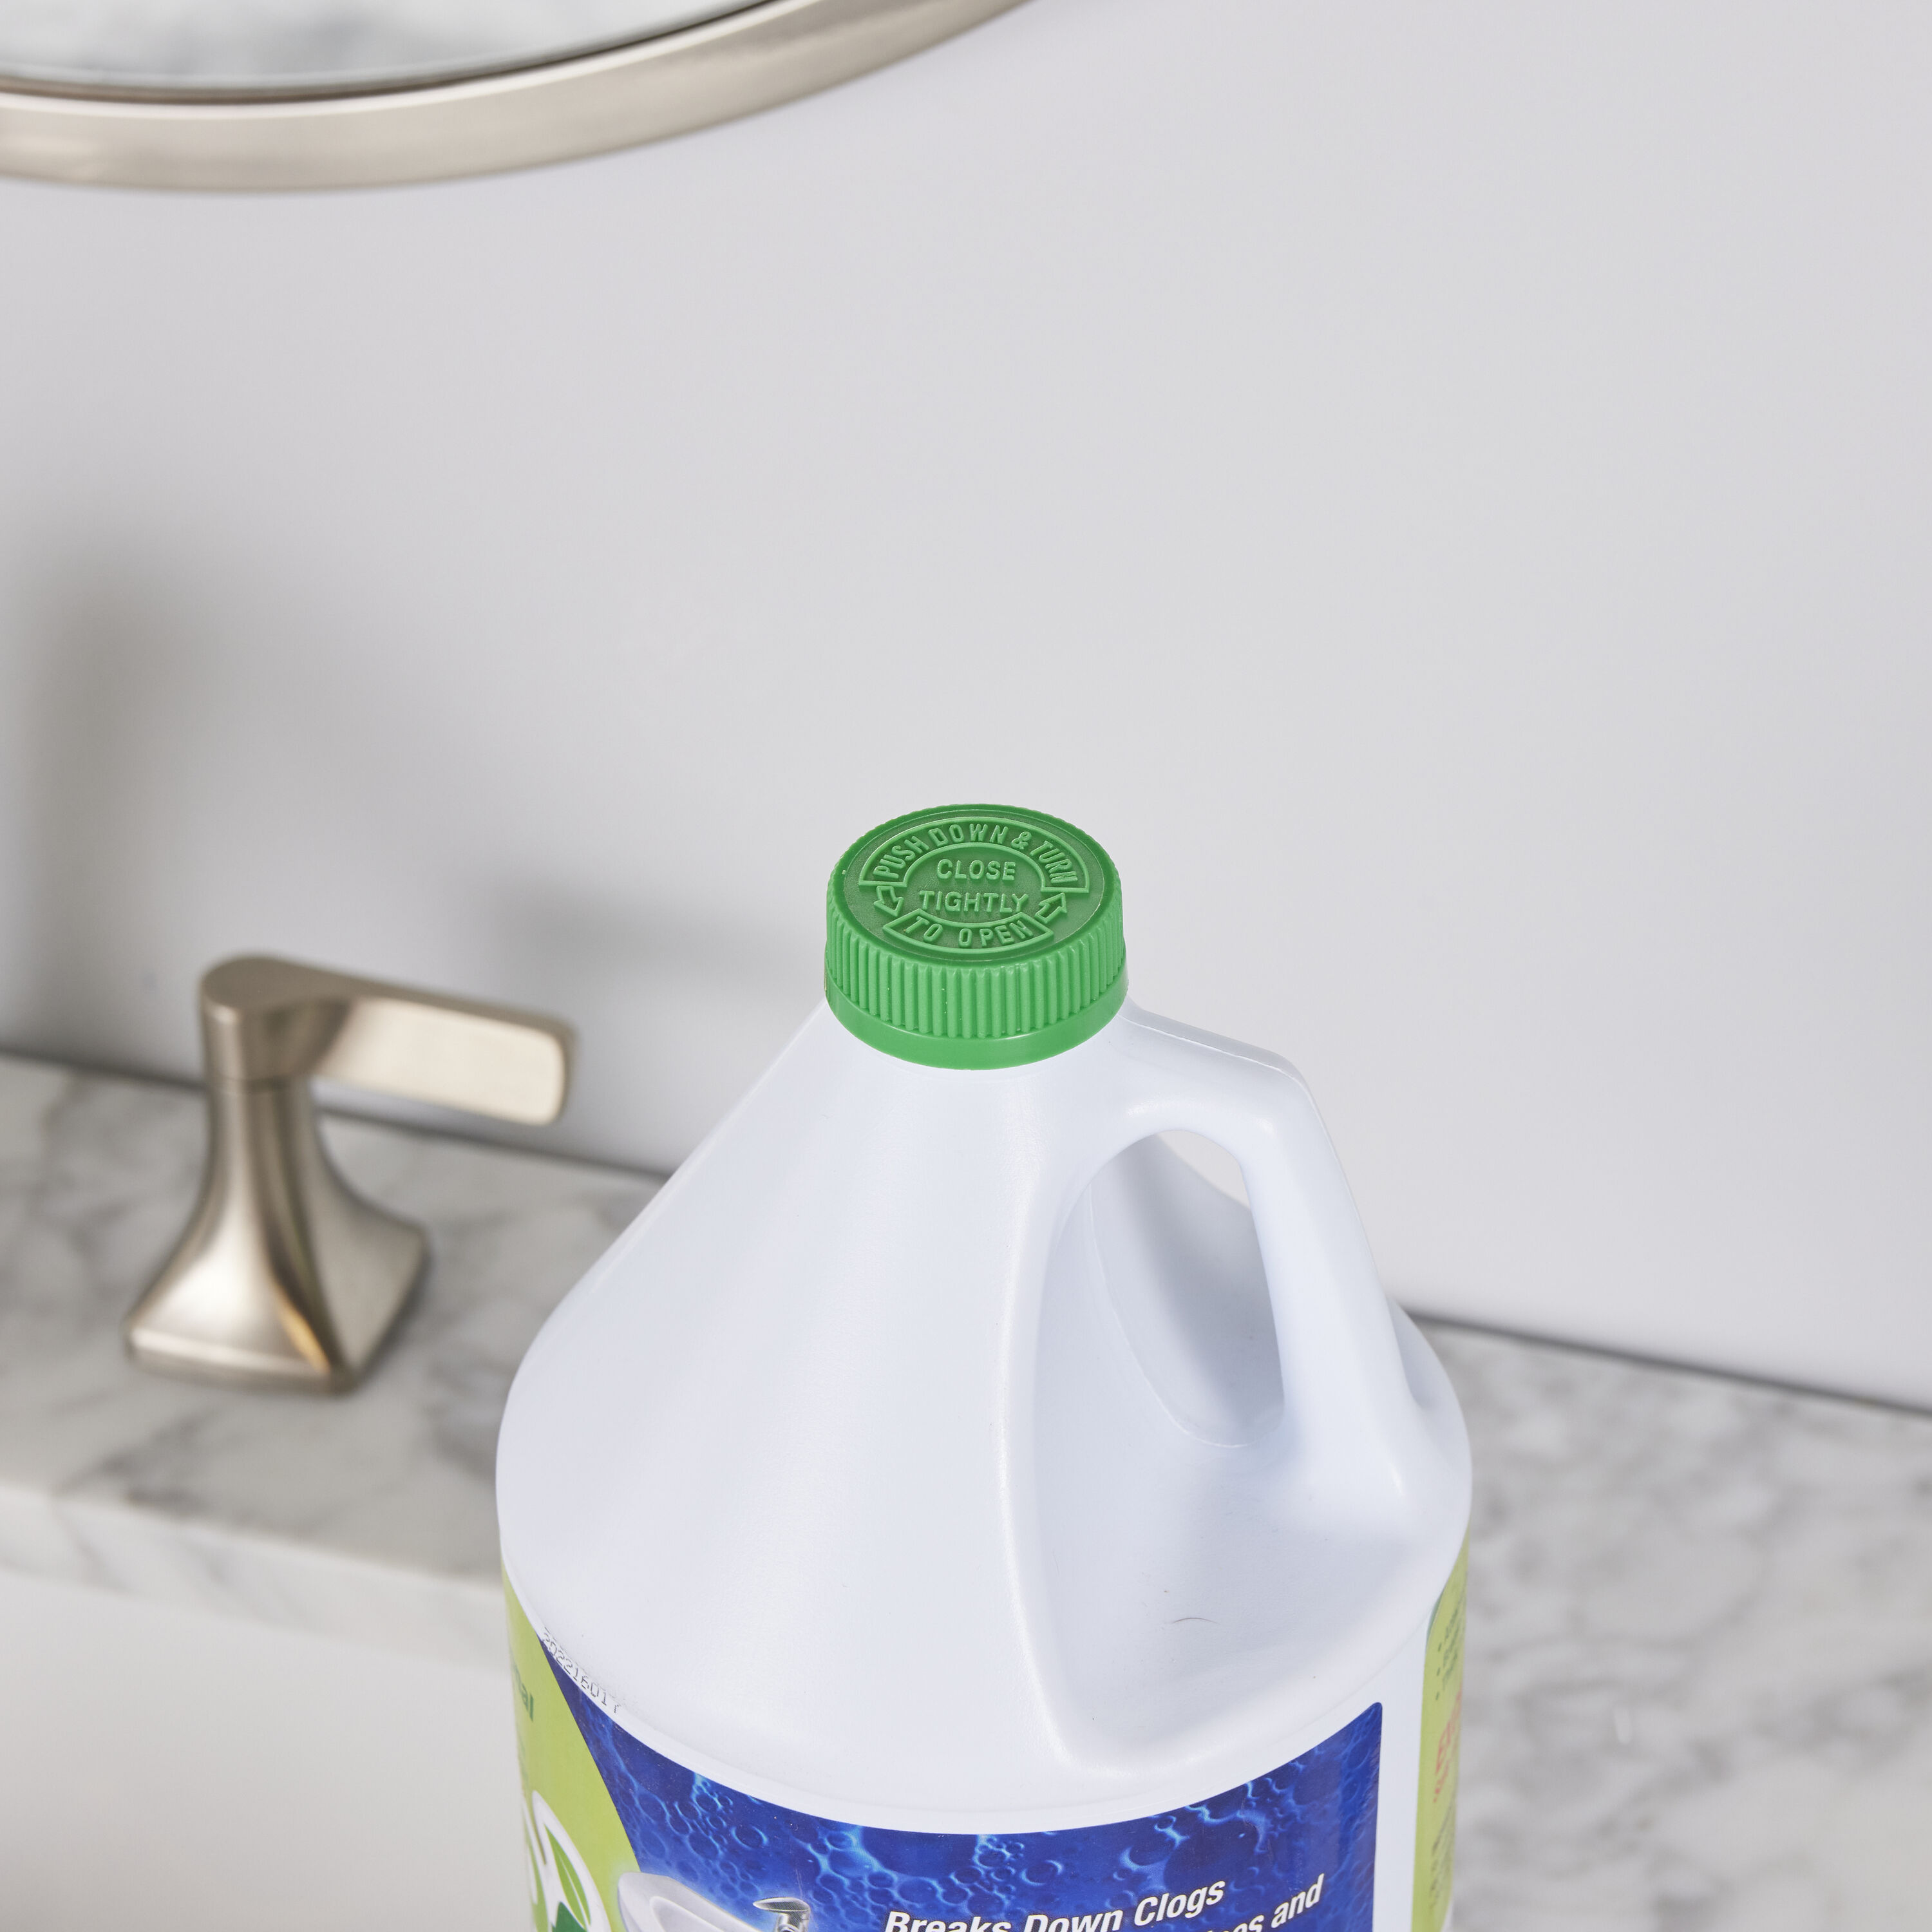 The 7 Best Drain Cleaners to Use (Including Eco-Friendly Options)